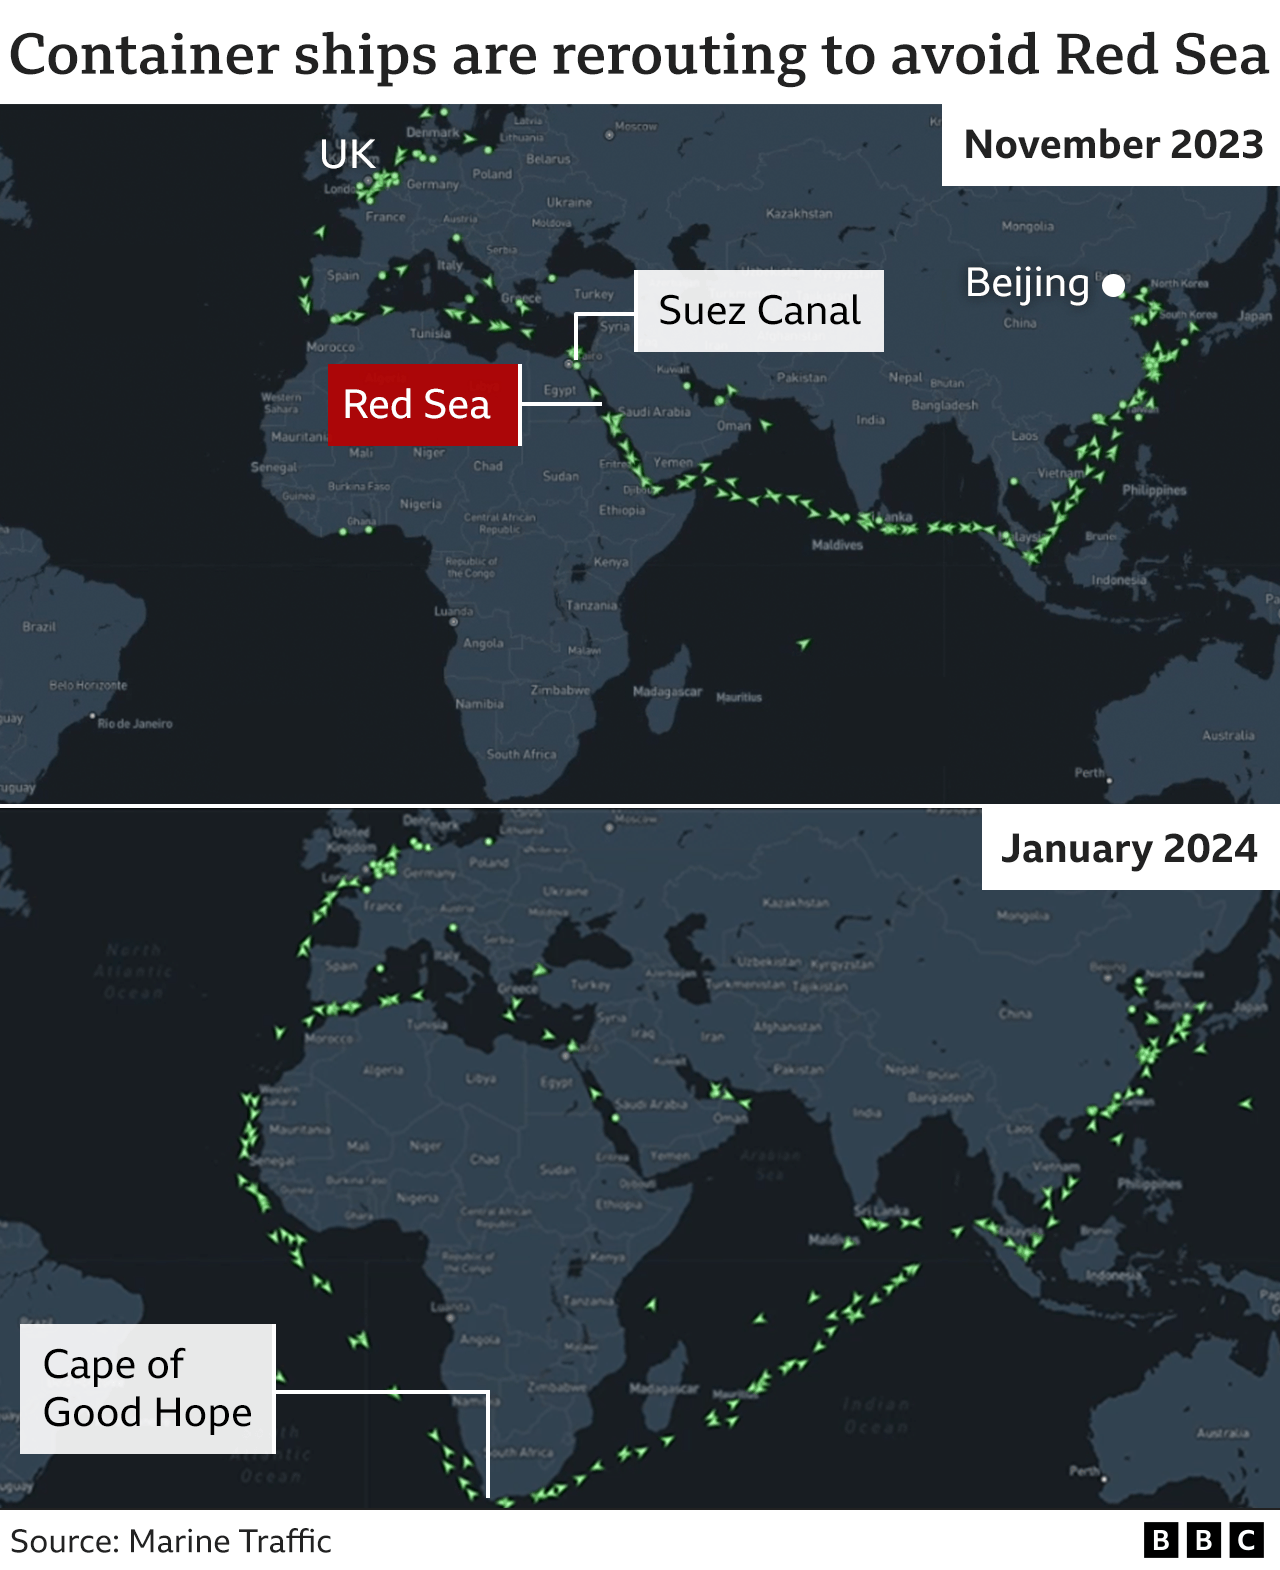 Two maps comparing how many container ships in November 2023 and January 2024 - with far fewer passing through the Red Sea in the latest image